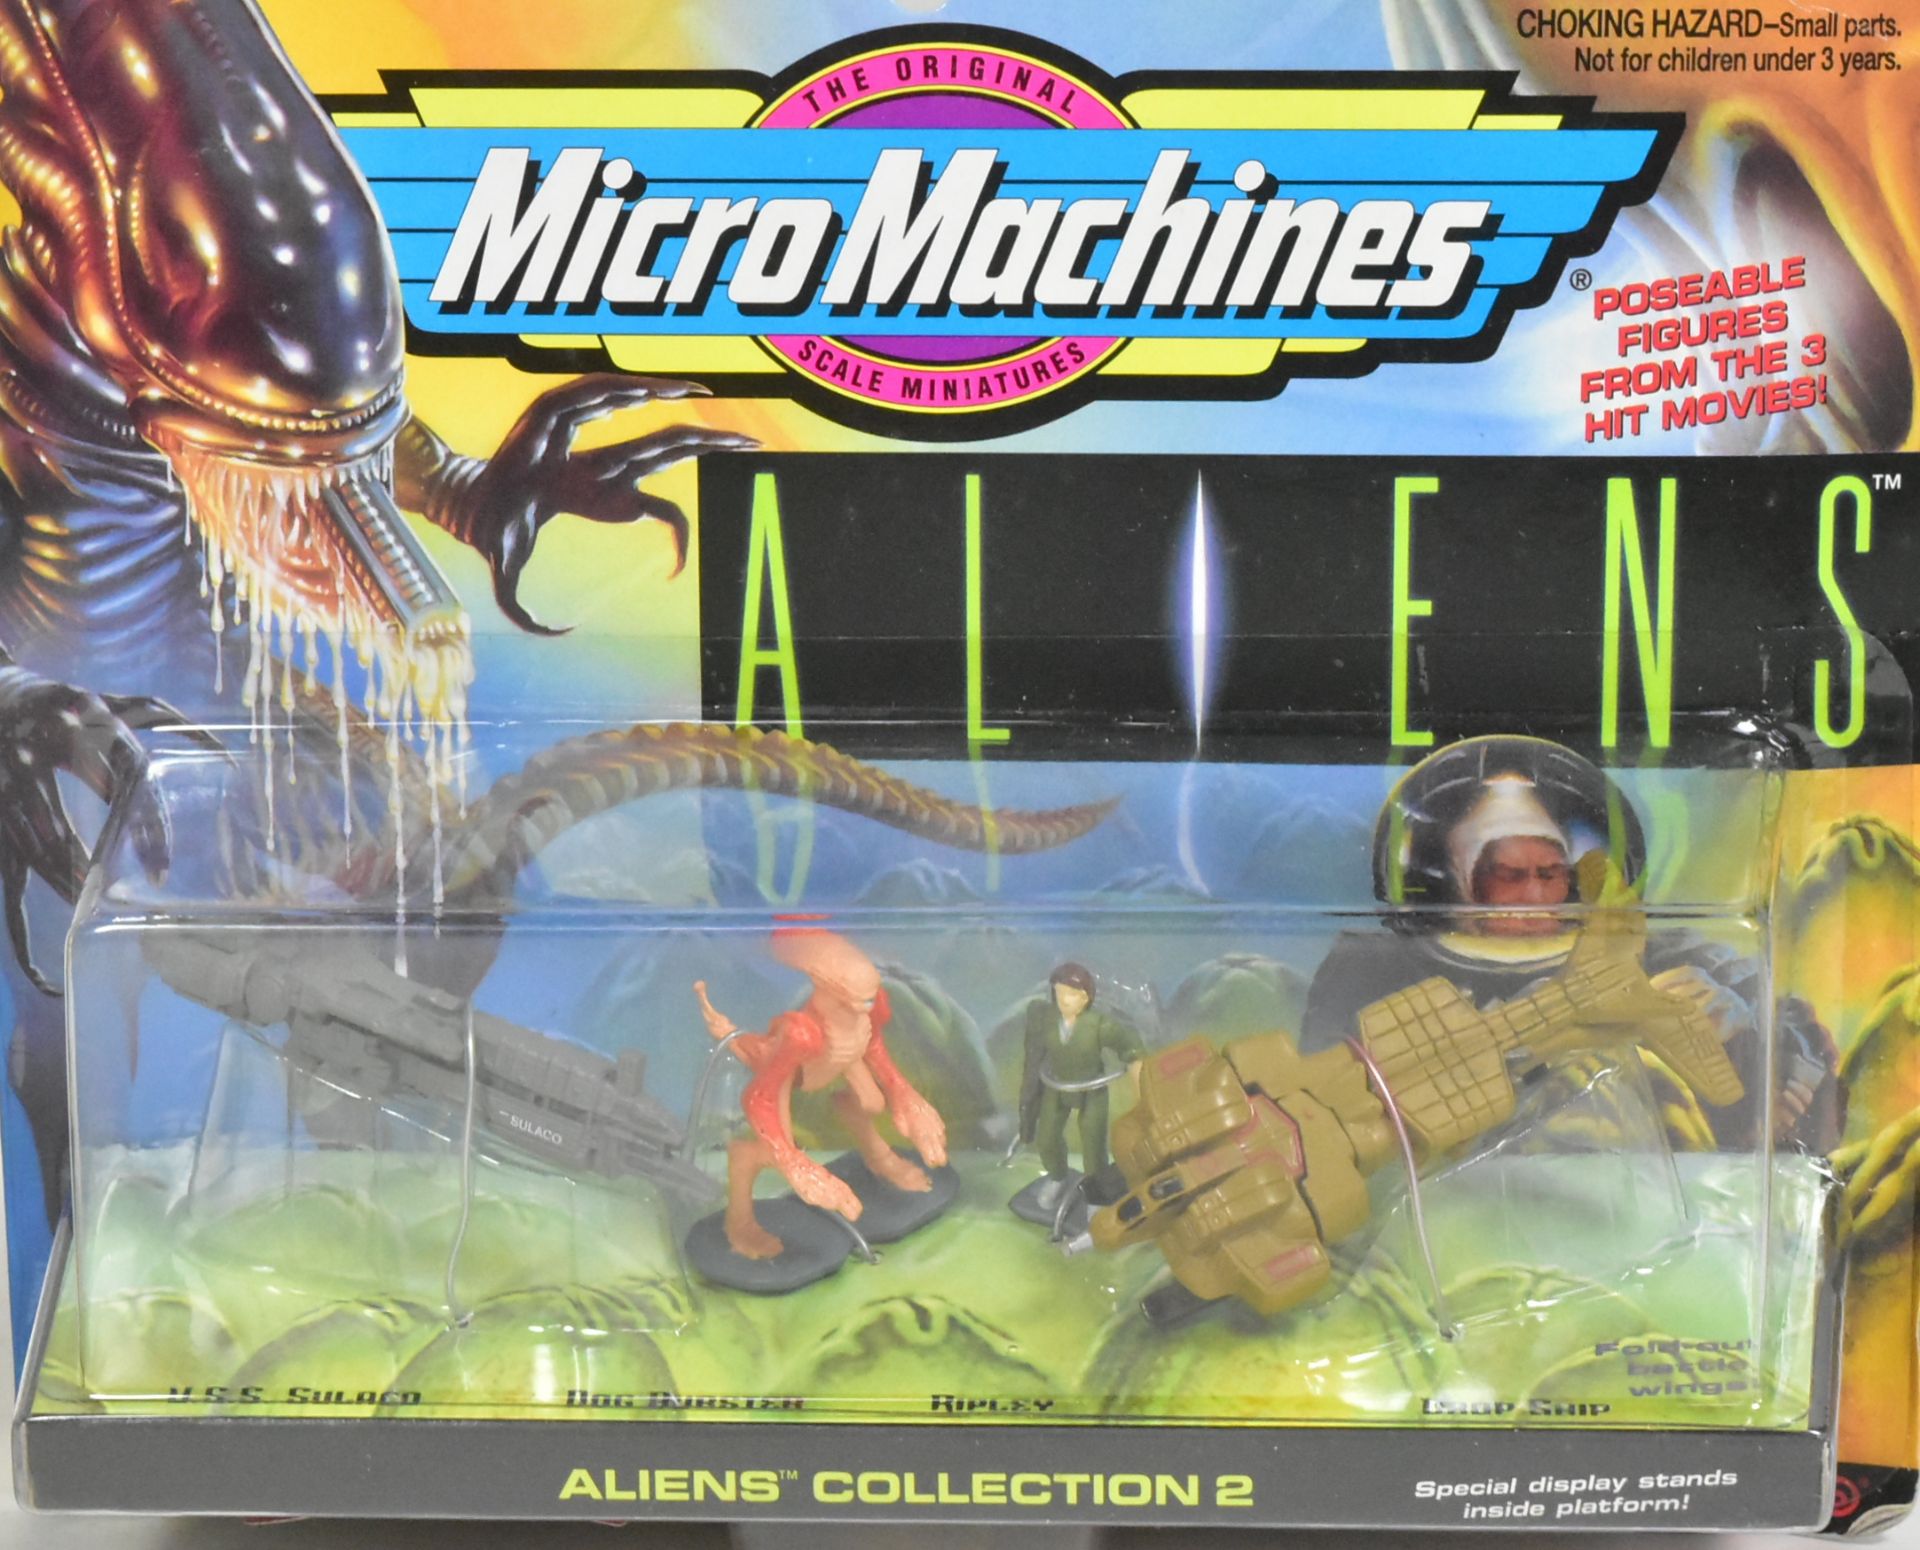 MICRO MACHINES - X3 MICRO MACHINES ALIEN COLLECTION 1, 2 & 3 - Image 4 of 4